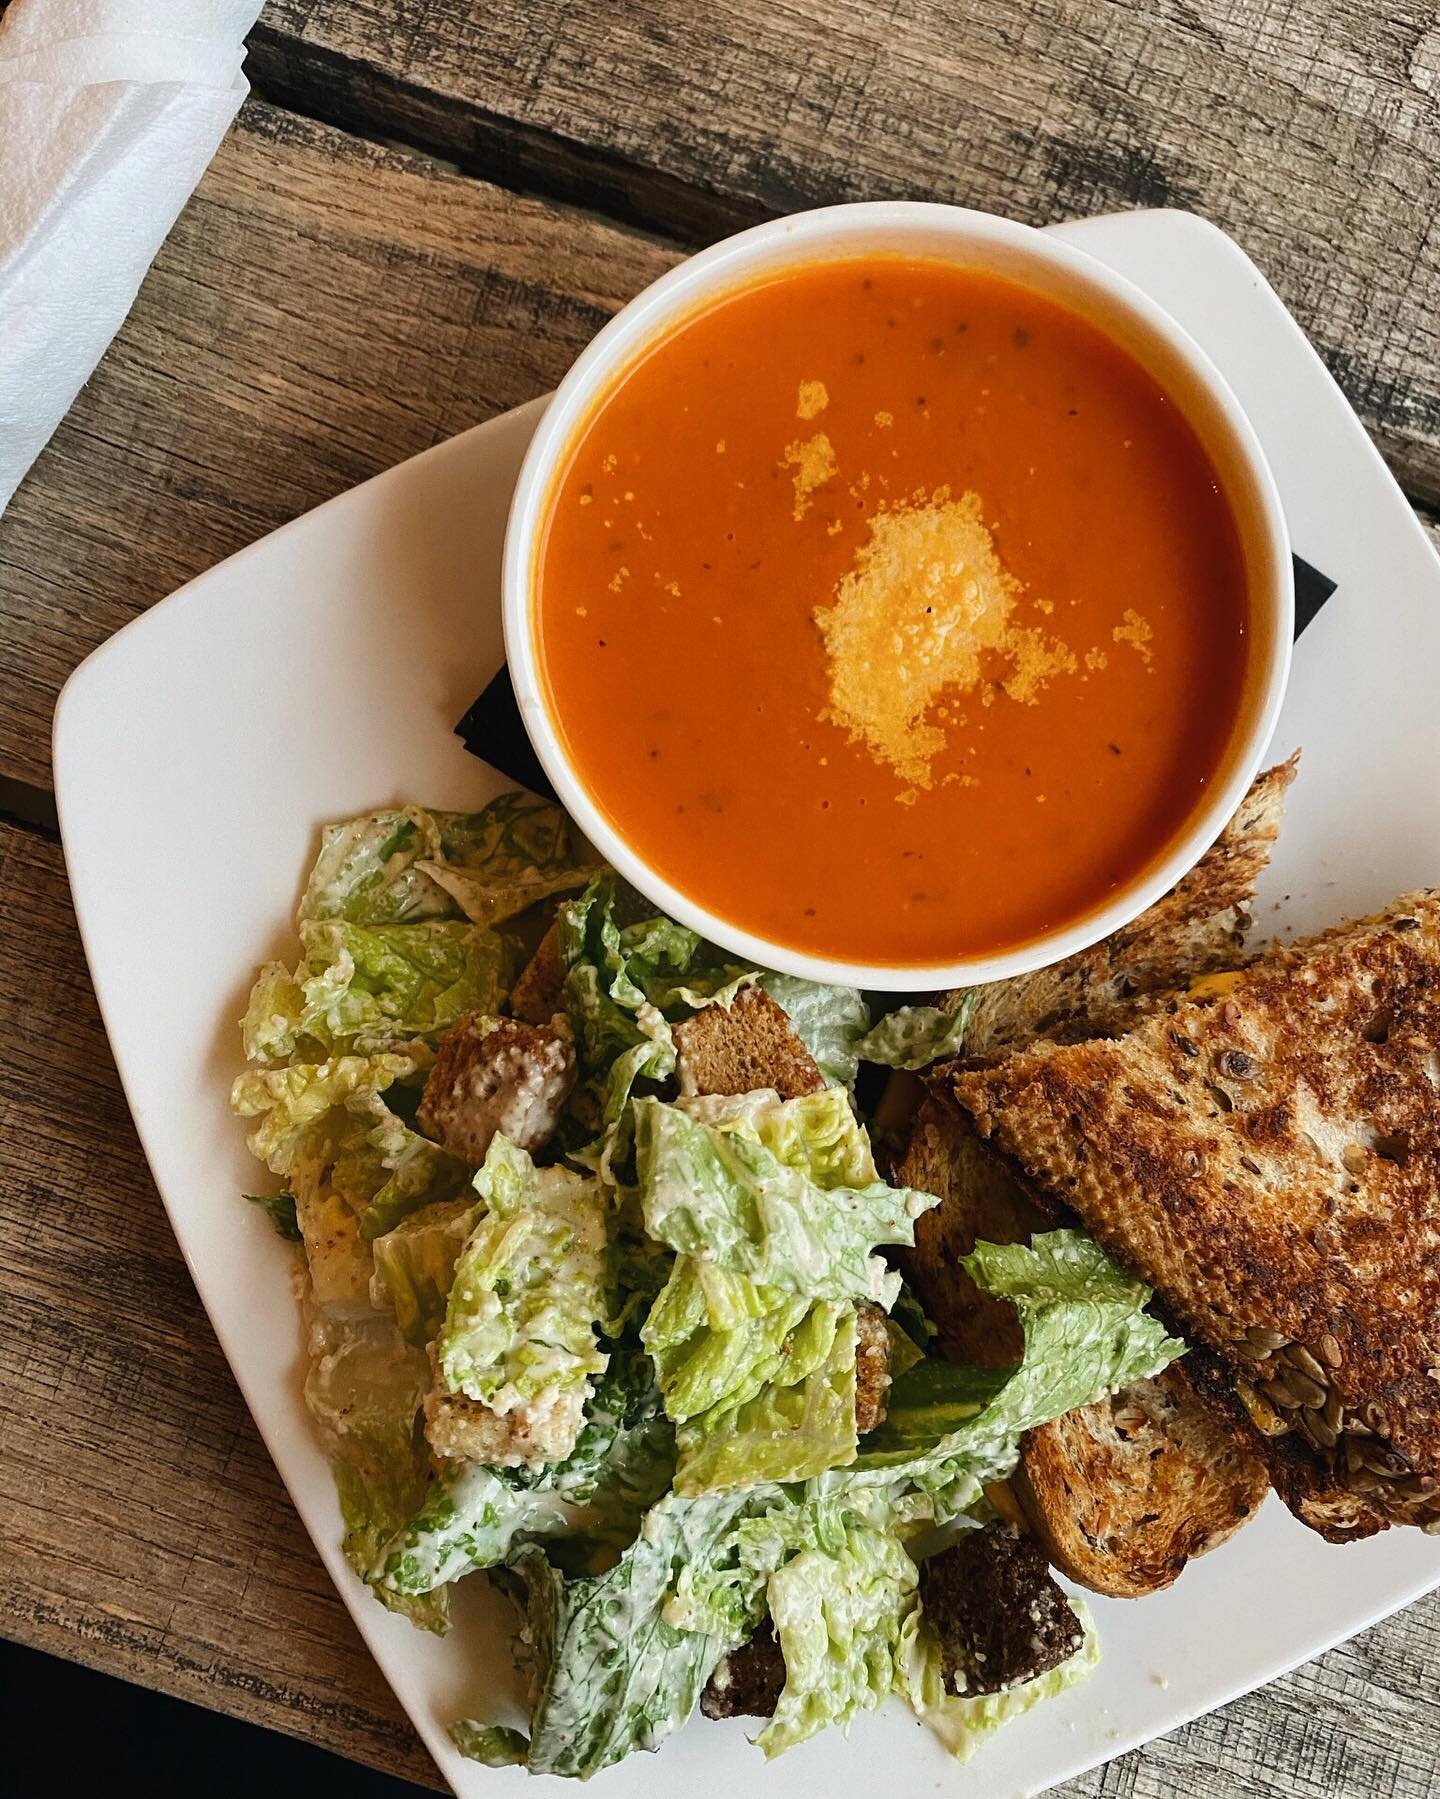 A little soup + salad action for your hump day 💫 
- 
Come enjoy the beautiful weather on our patio! Open until 9 pm